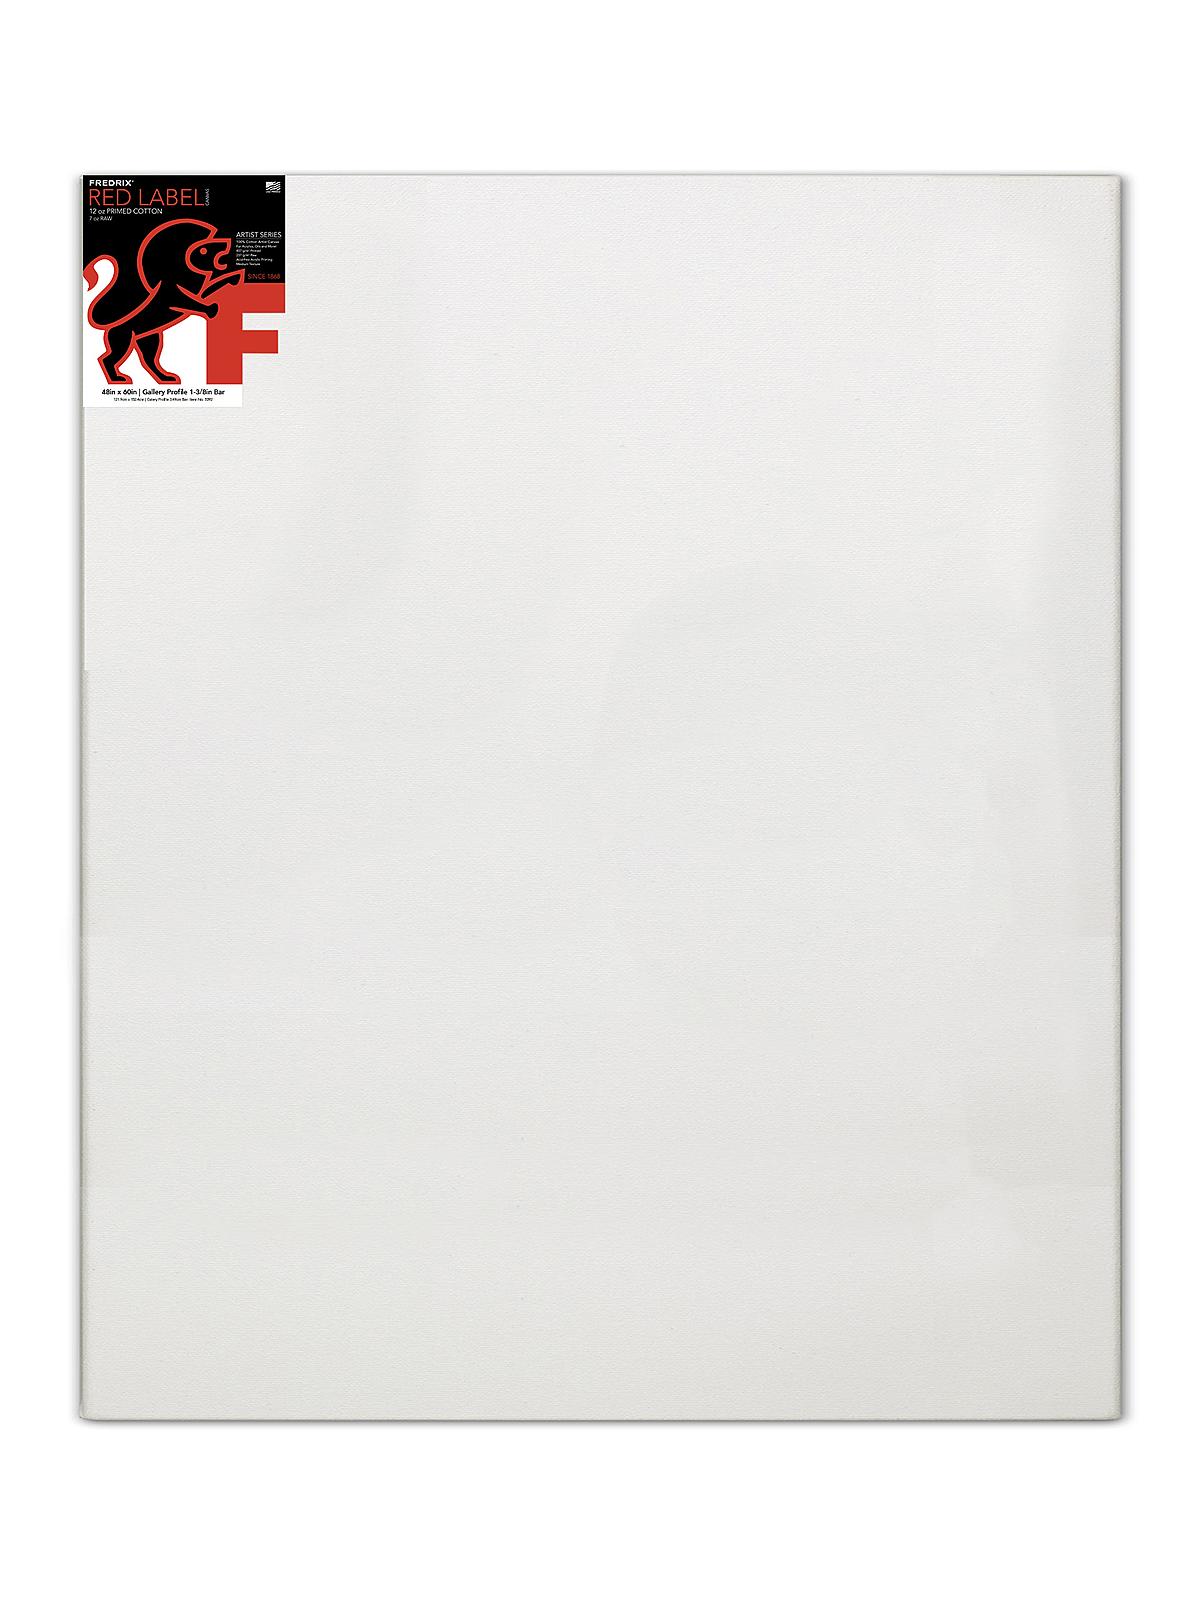 Red Label Gallerywrap Stretched Canvas 48 In. X 60 In. Each